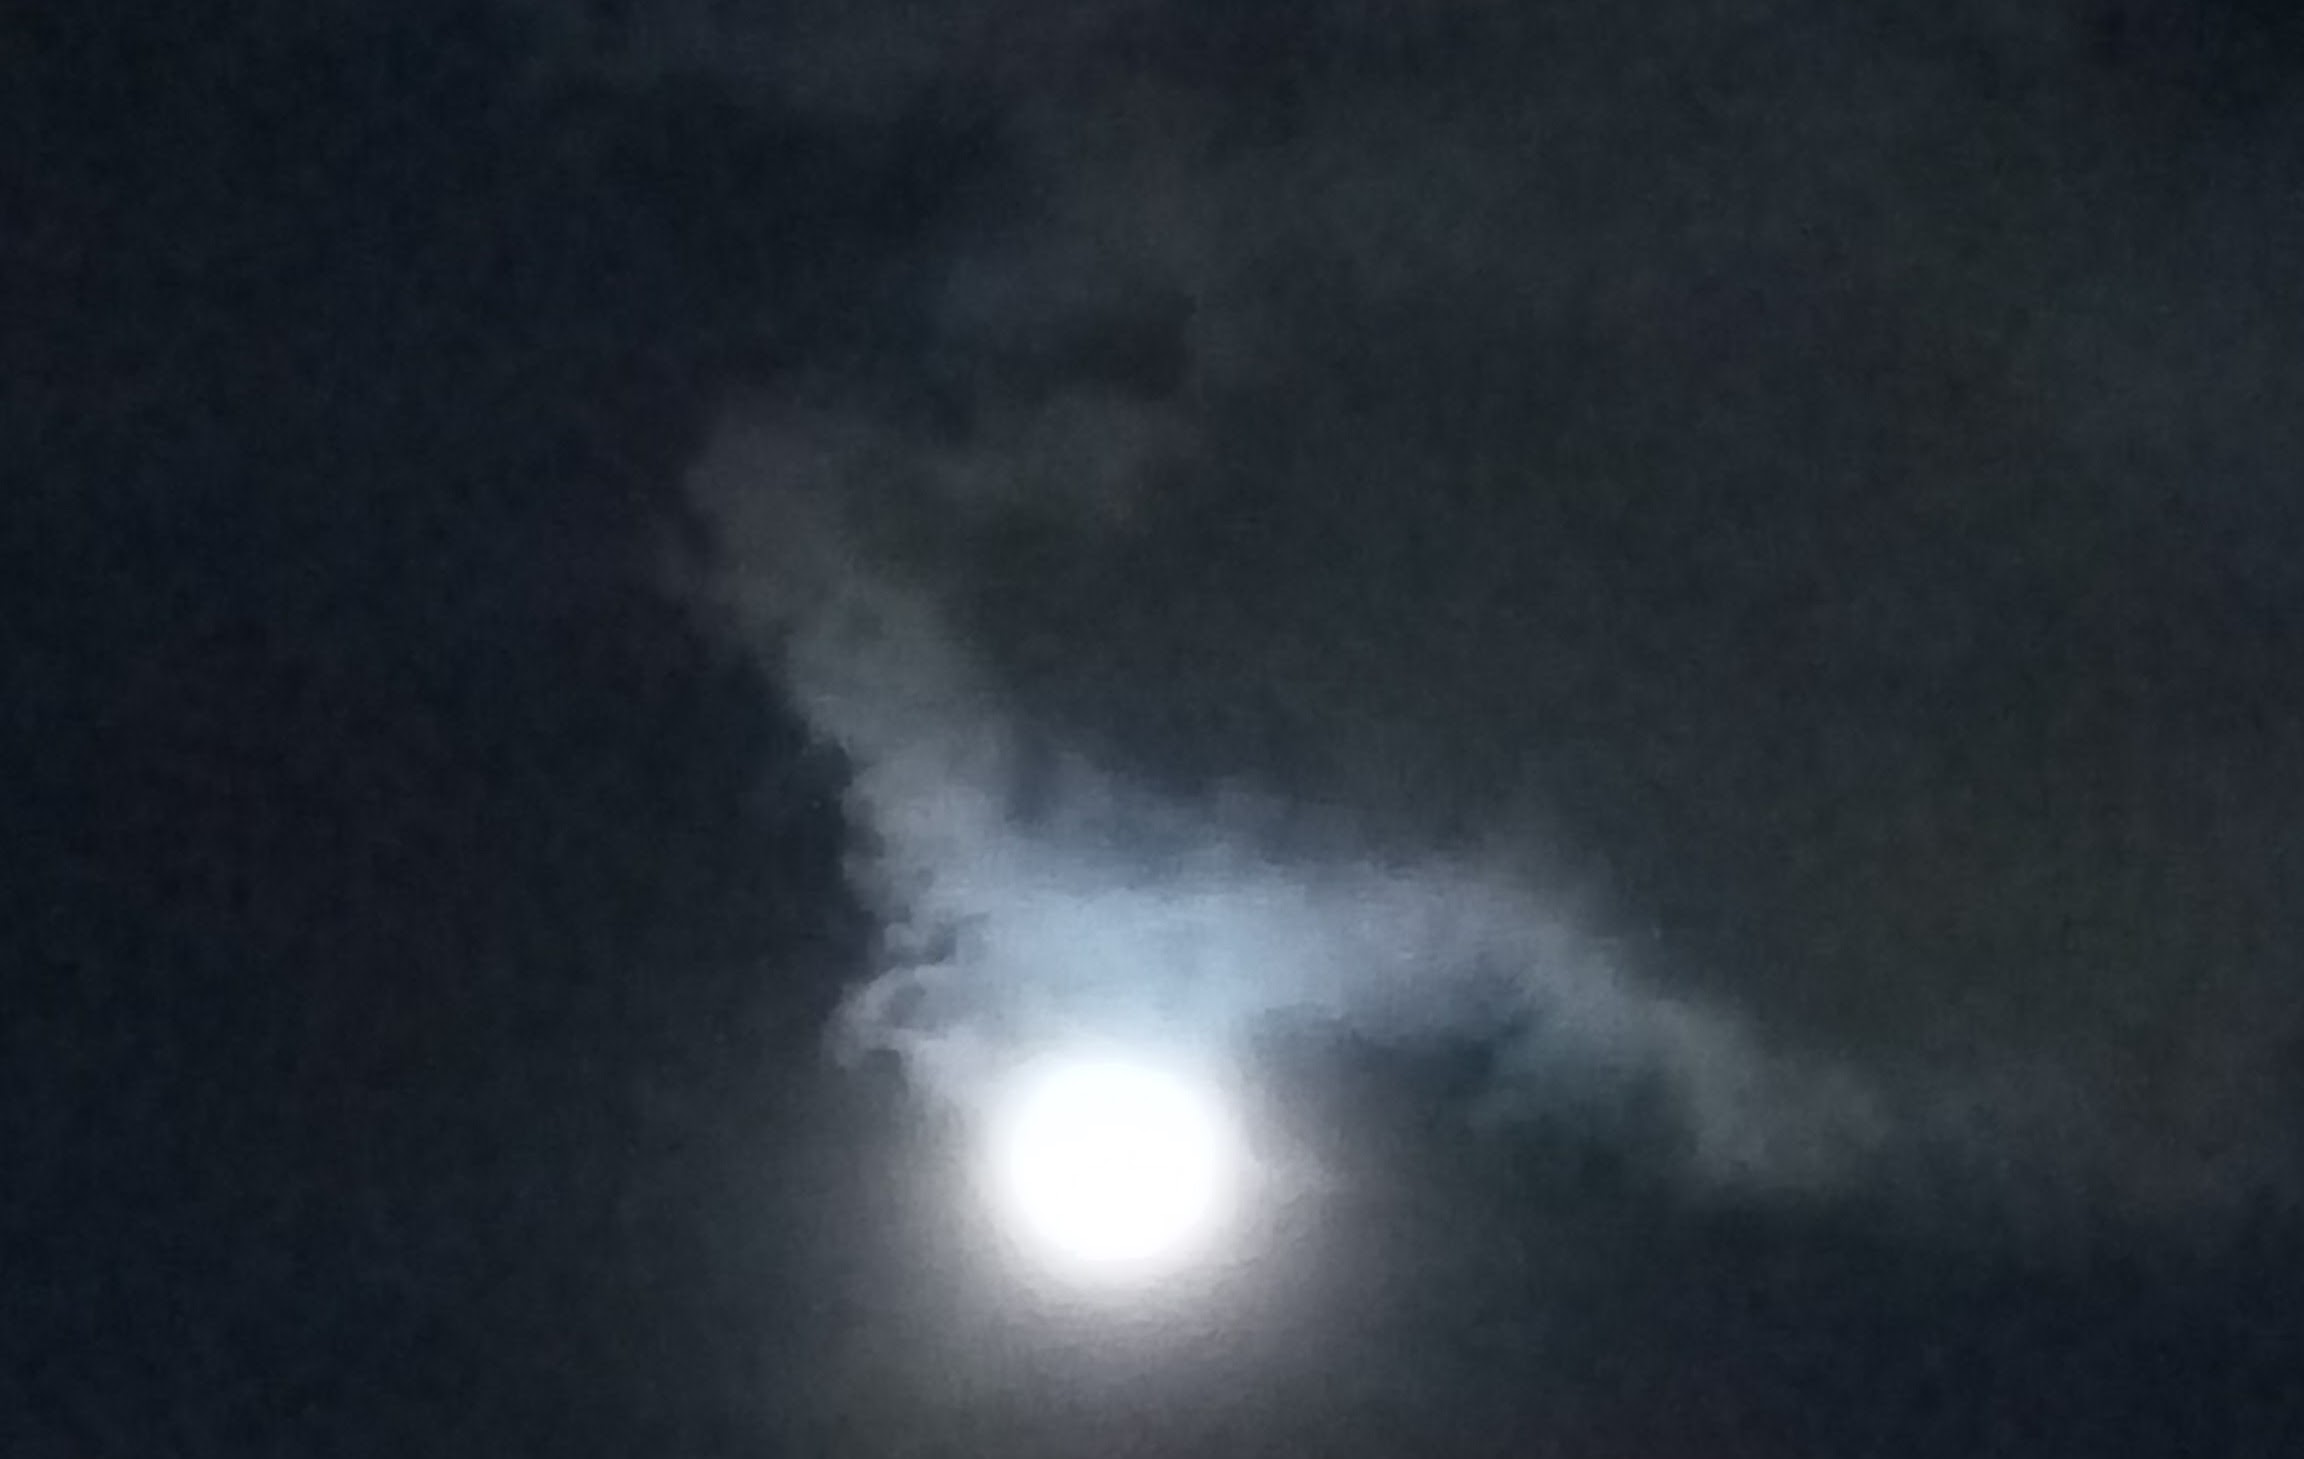 Moon or Mom? - A view of the Clouds unveiling the Moon